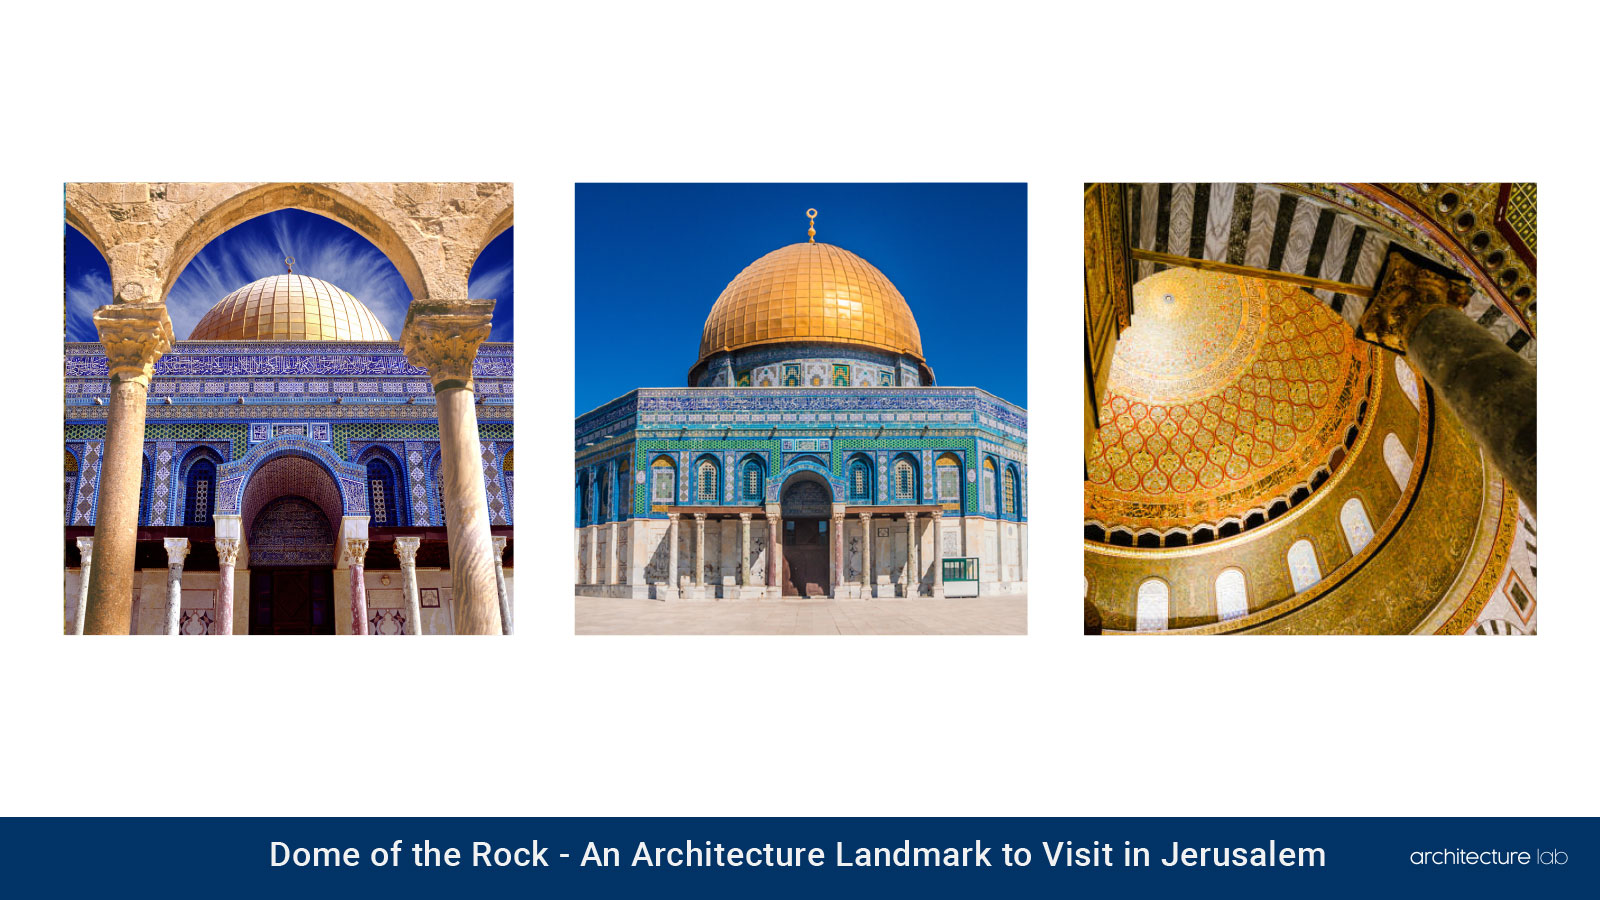 Dome of the rock: an architecture landmark to visit in jerusalem